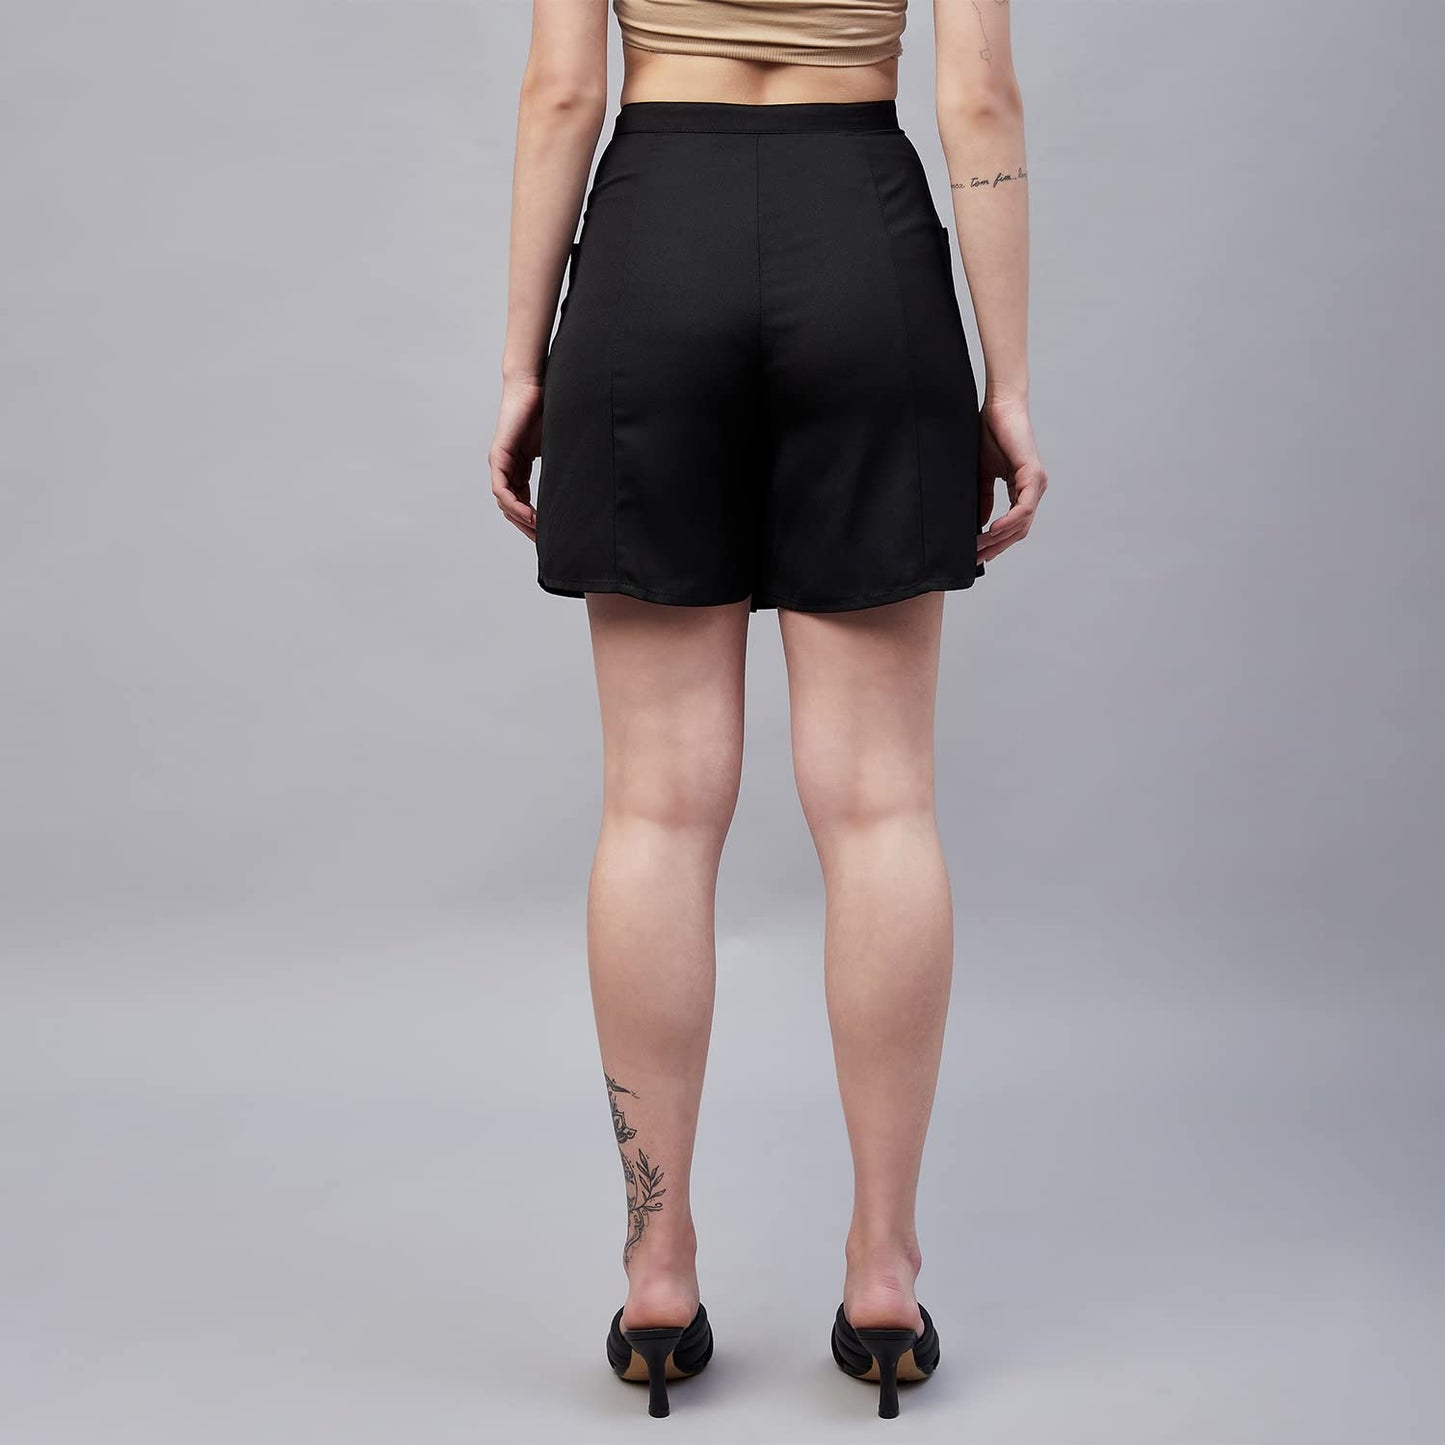 Marie Claire Polyester Western Skirt Black